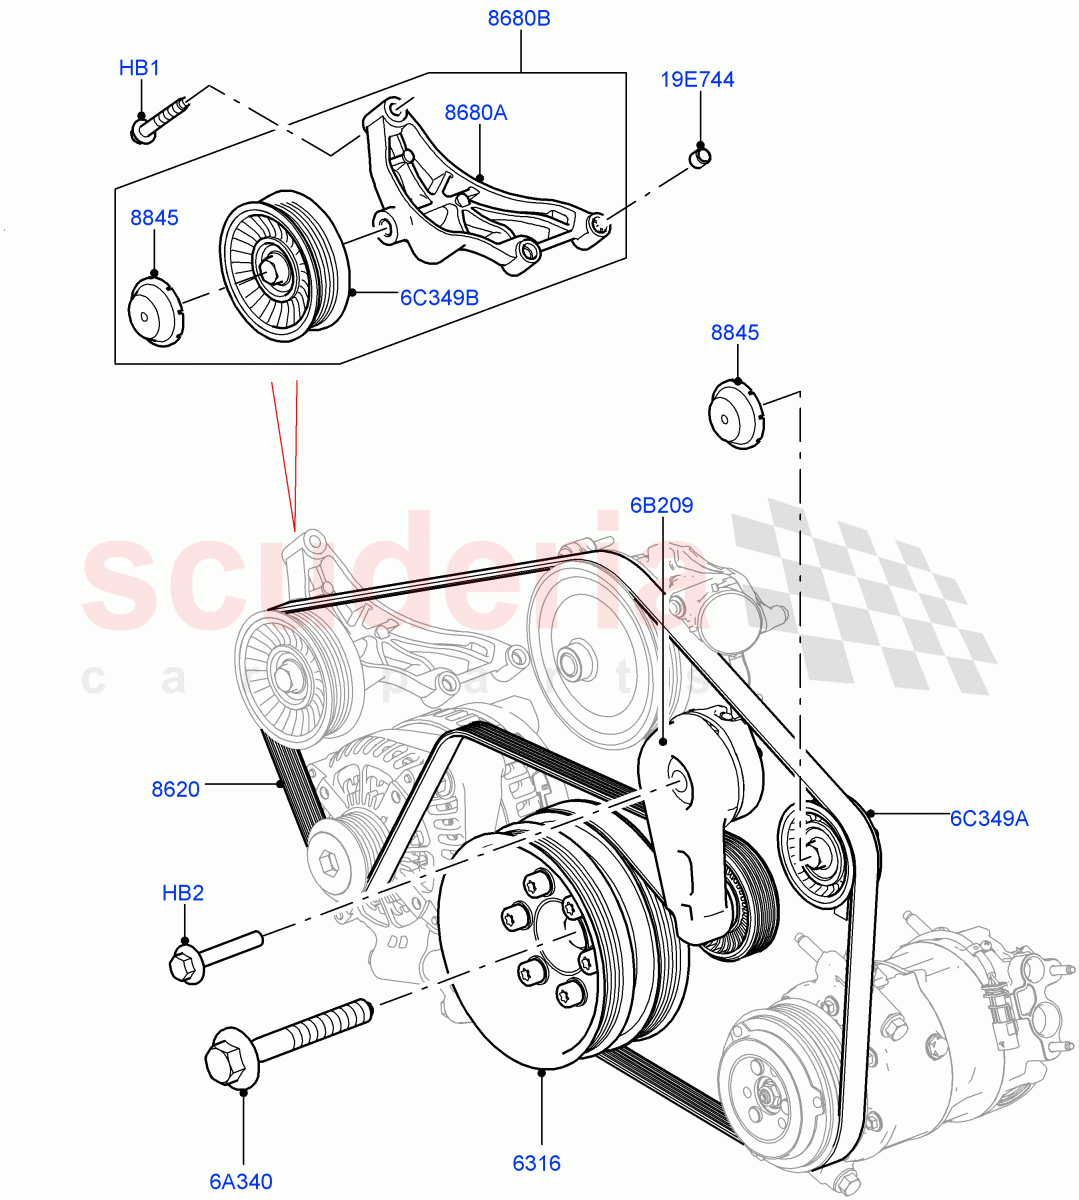 Pulleys And Drive Belts(Primary Drive, Solihull Plant Build)(3.0L DOHC GDI SC V6 PETROL)((V)FROMEA000001) of Land Rover Land Rover Range Rover (2012-2021) [3.0 DOHC GDI SC V6 Petrol]